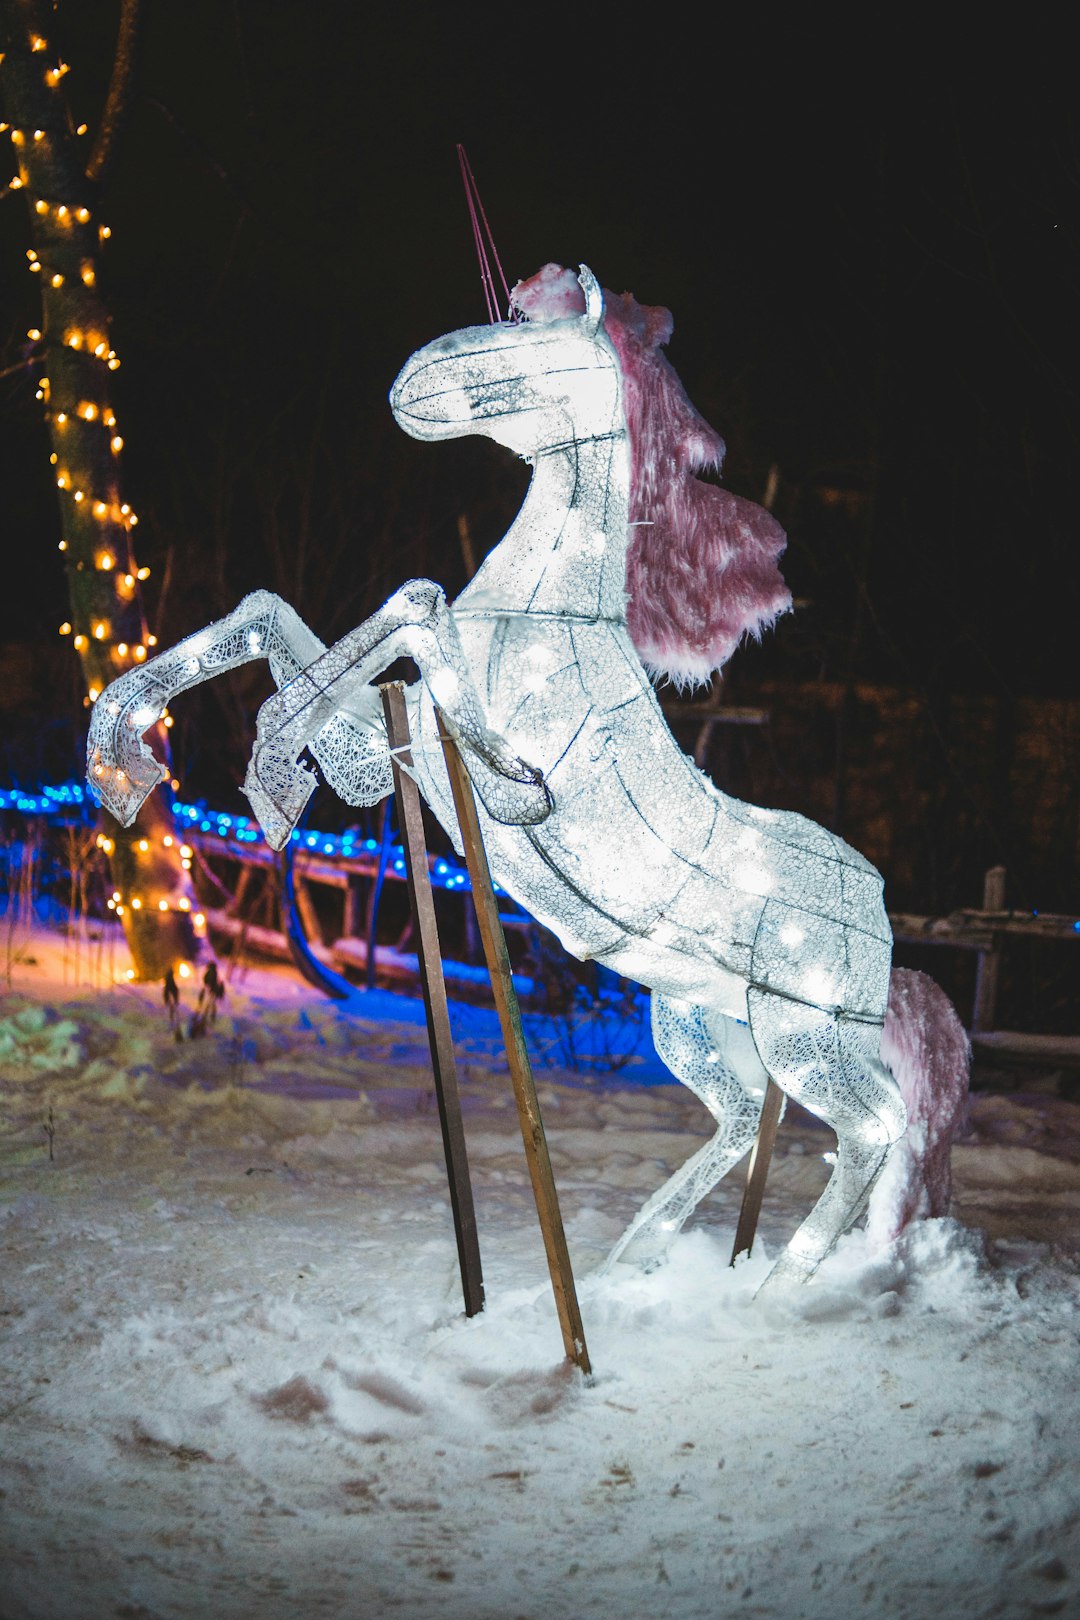 white rearing horse Christmas decor during night time